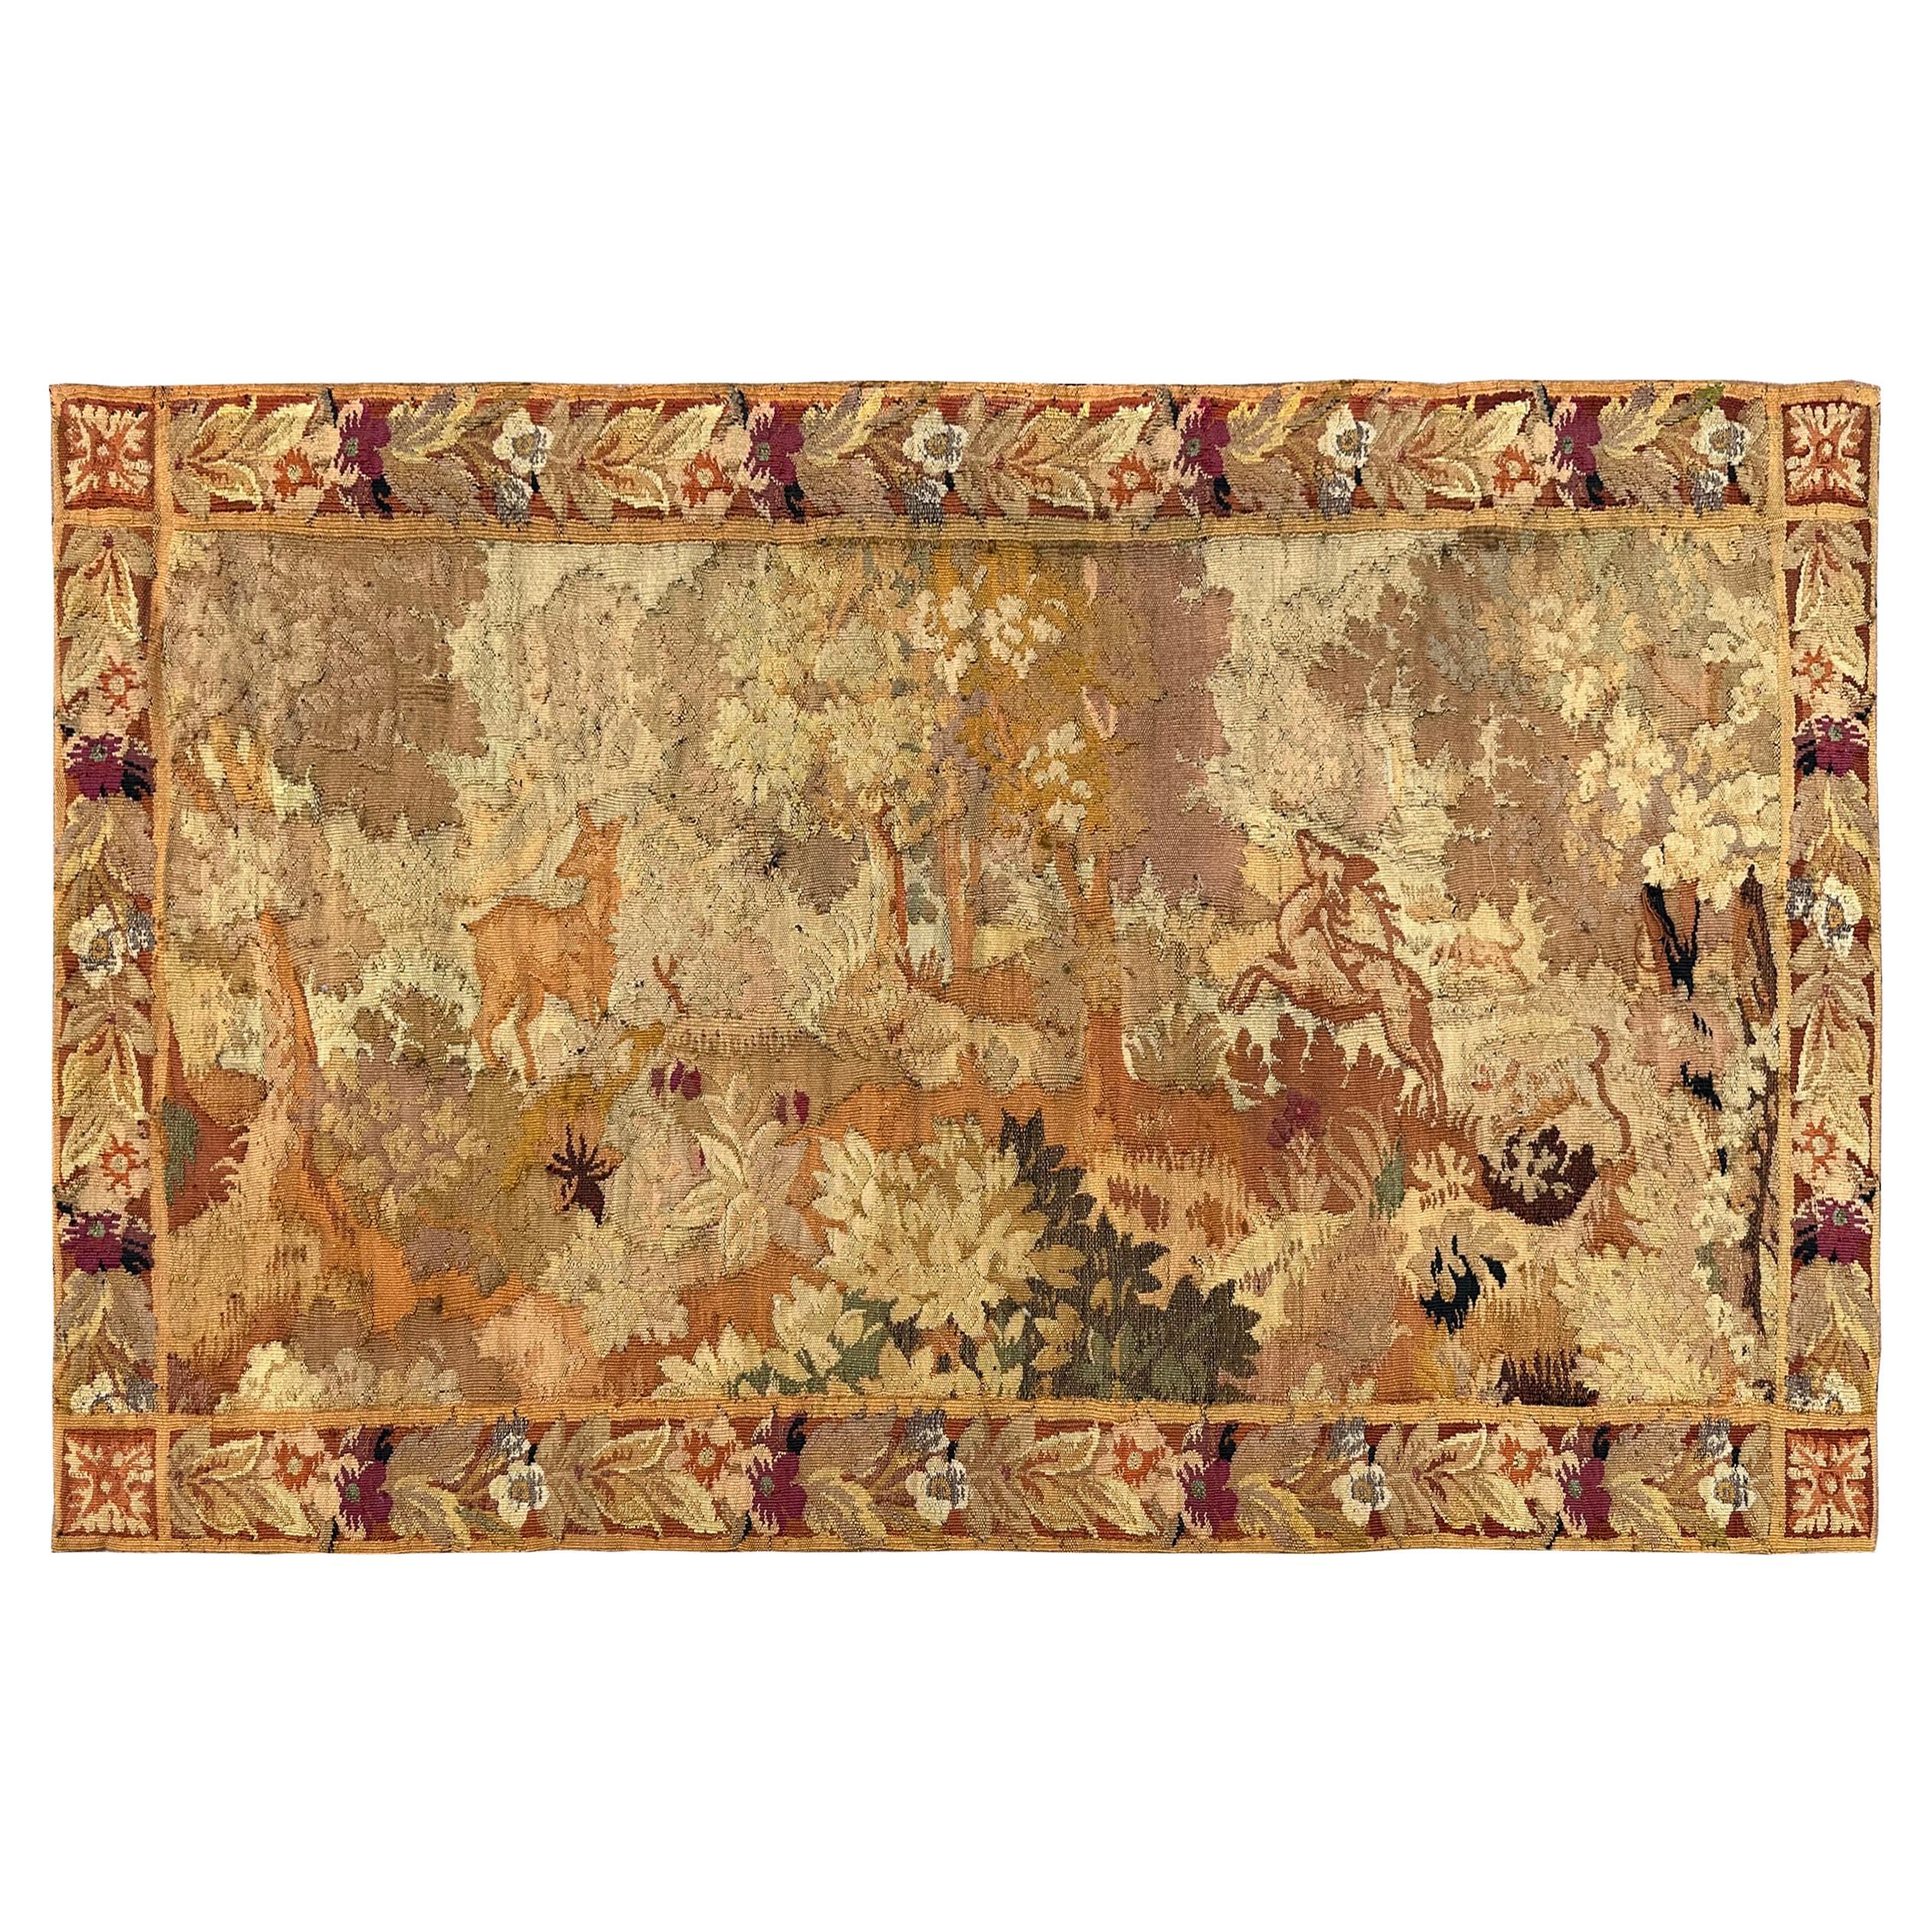 Antique French Tapestry Verdure Deer 3x6 Wool Foundation 92 x 172cm For Sale